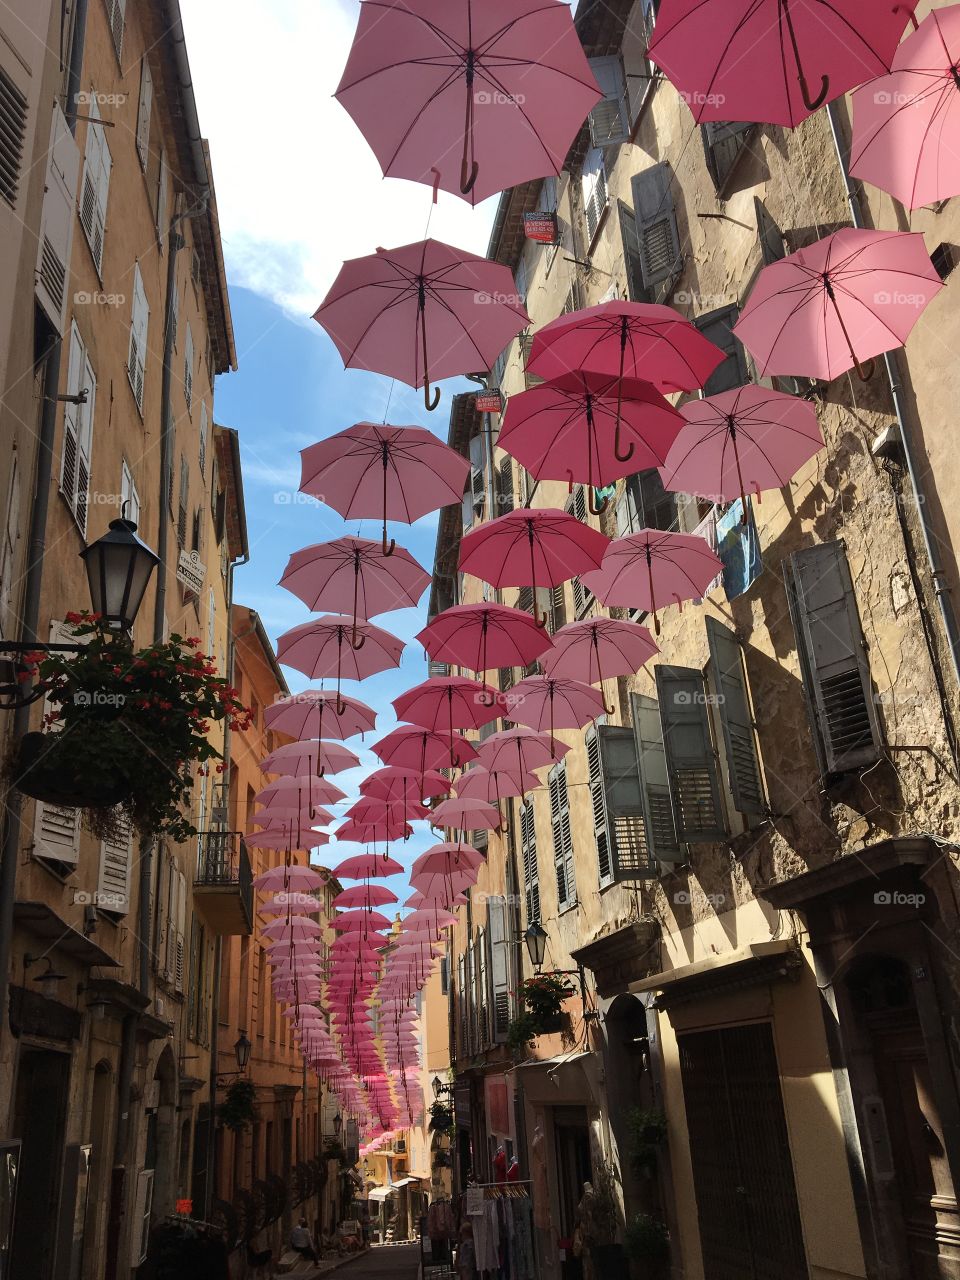 Pinky decorative umbrellas protecting from sun in historic streets